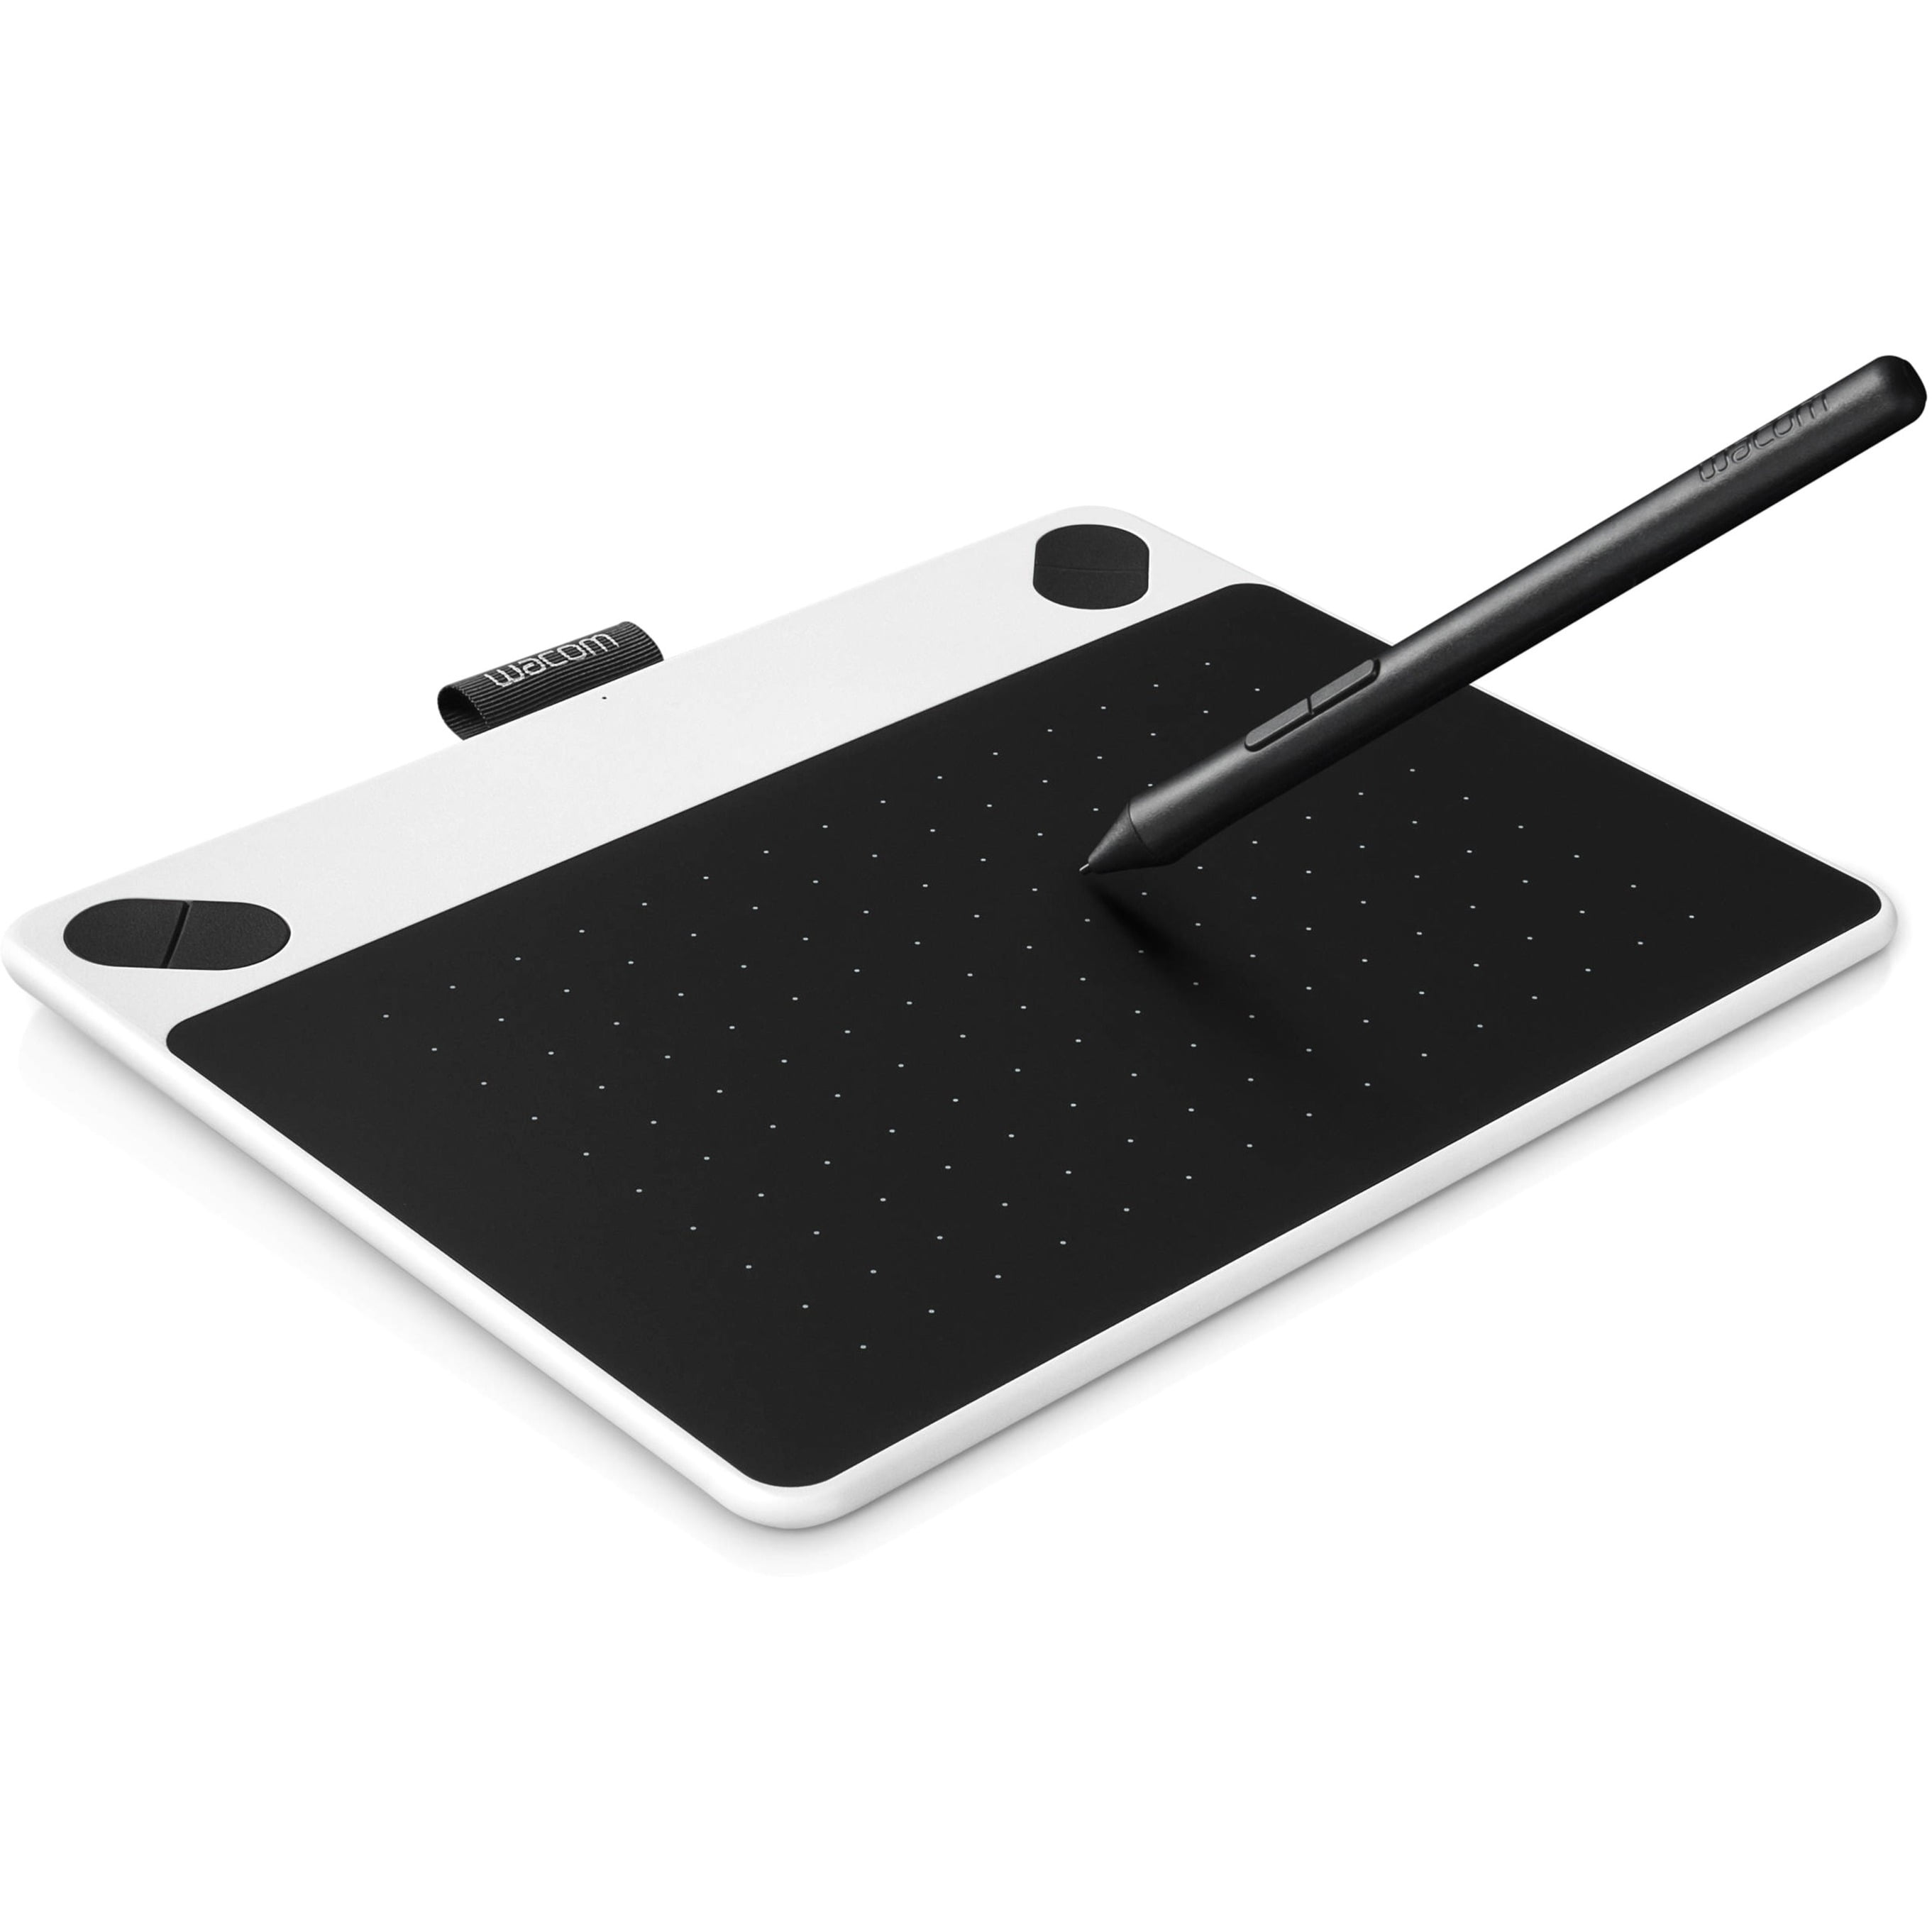 Wacom Tablet  Intuos Pen Tablets  PhotoshopSupportcom